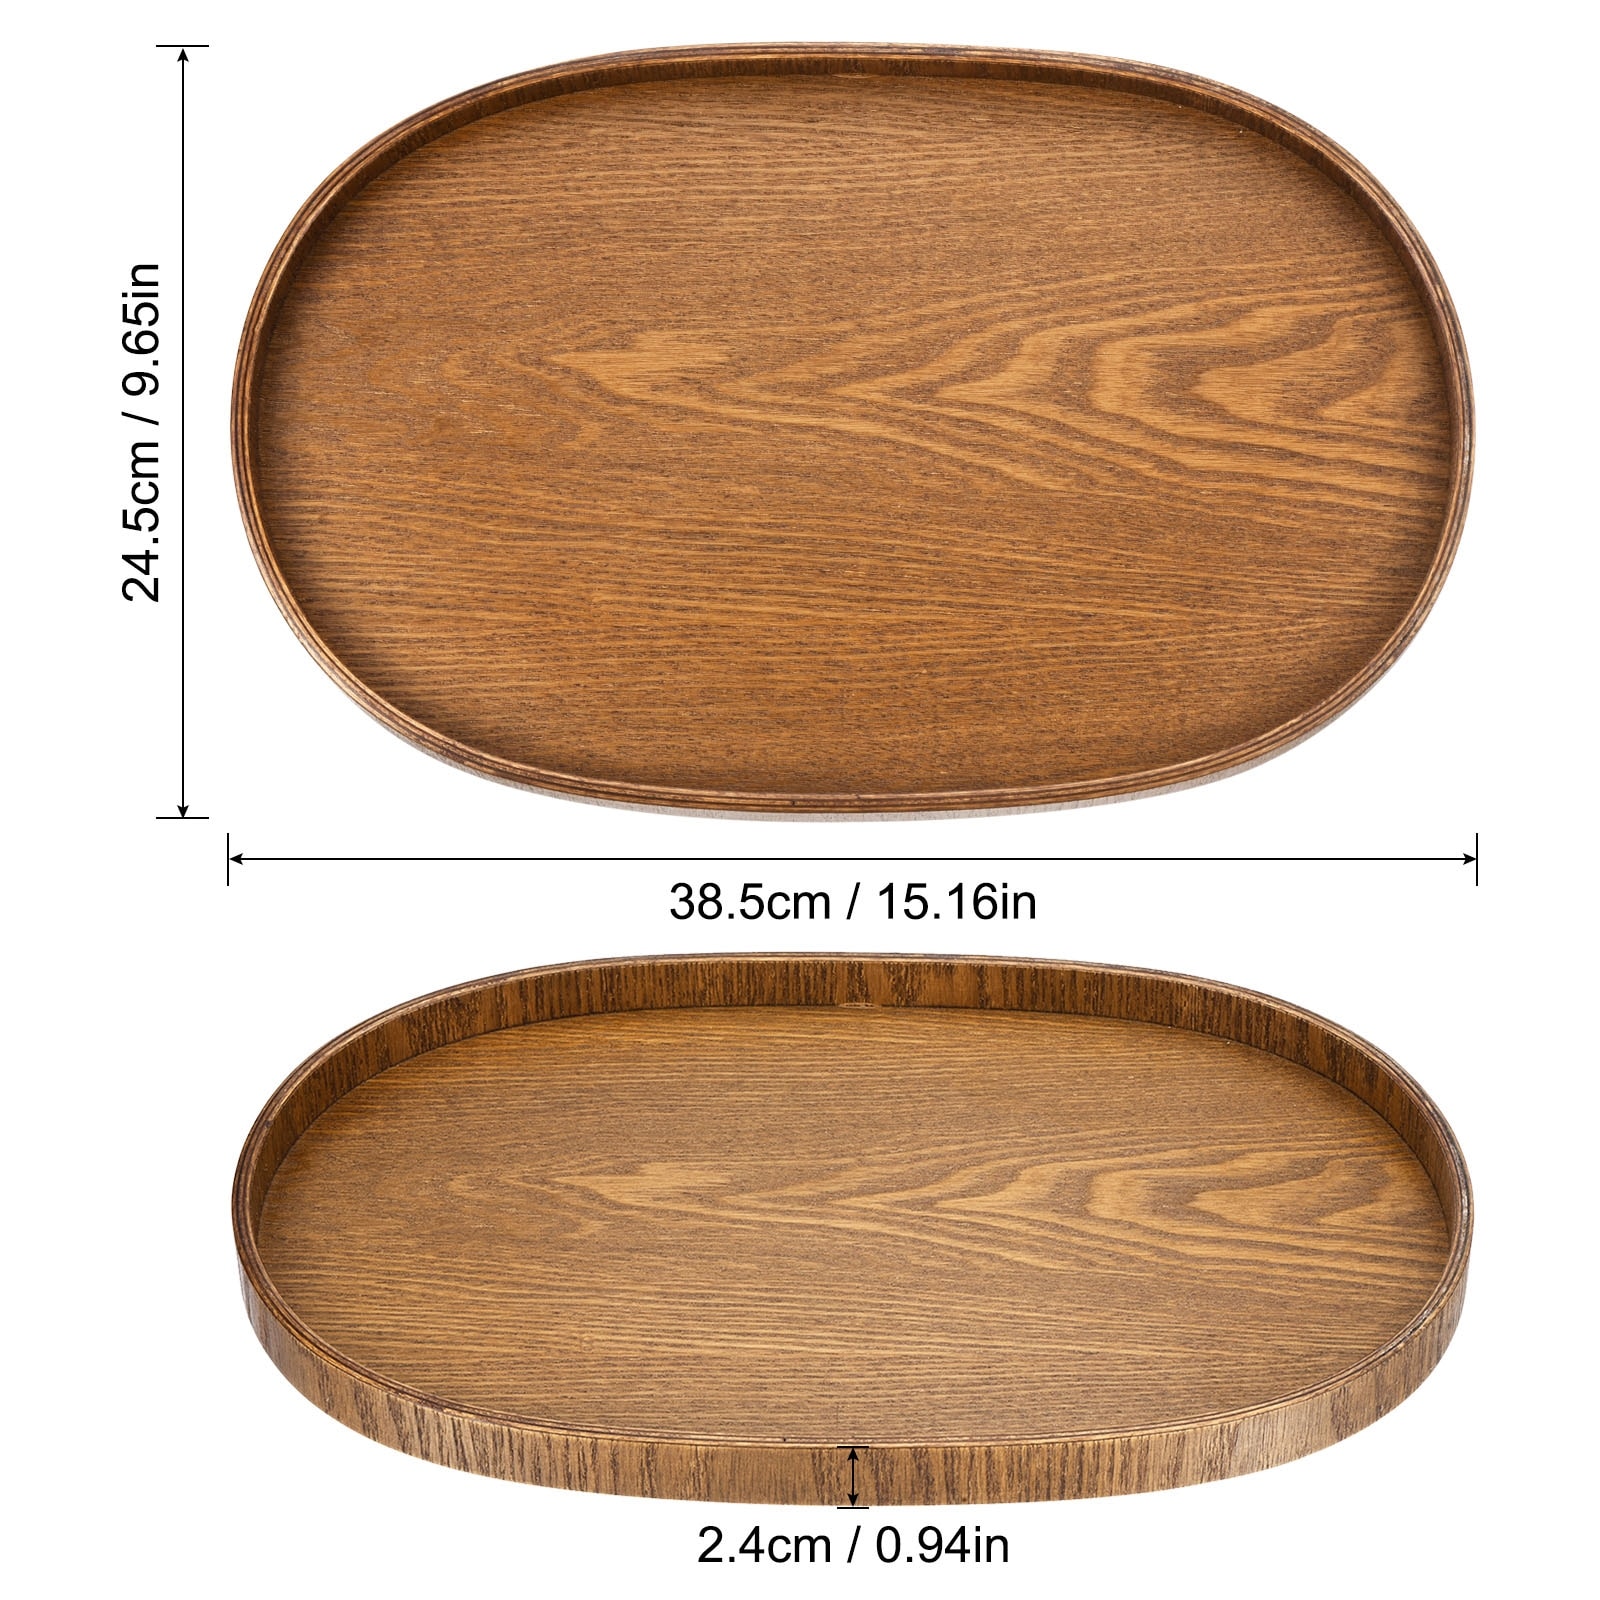 https://ak1.ostkcdn.com/images/products/is/images/direct/8c4562e559791f76261b77b141a2b41181f1bc0c/15x10%22-Wood-Serving-Tray-Oval-Decorative-Platter-Home-Kitchen-Table%2C-Brown.jpg